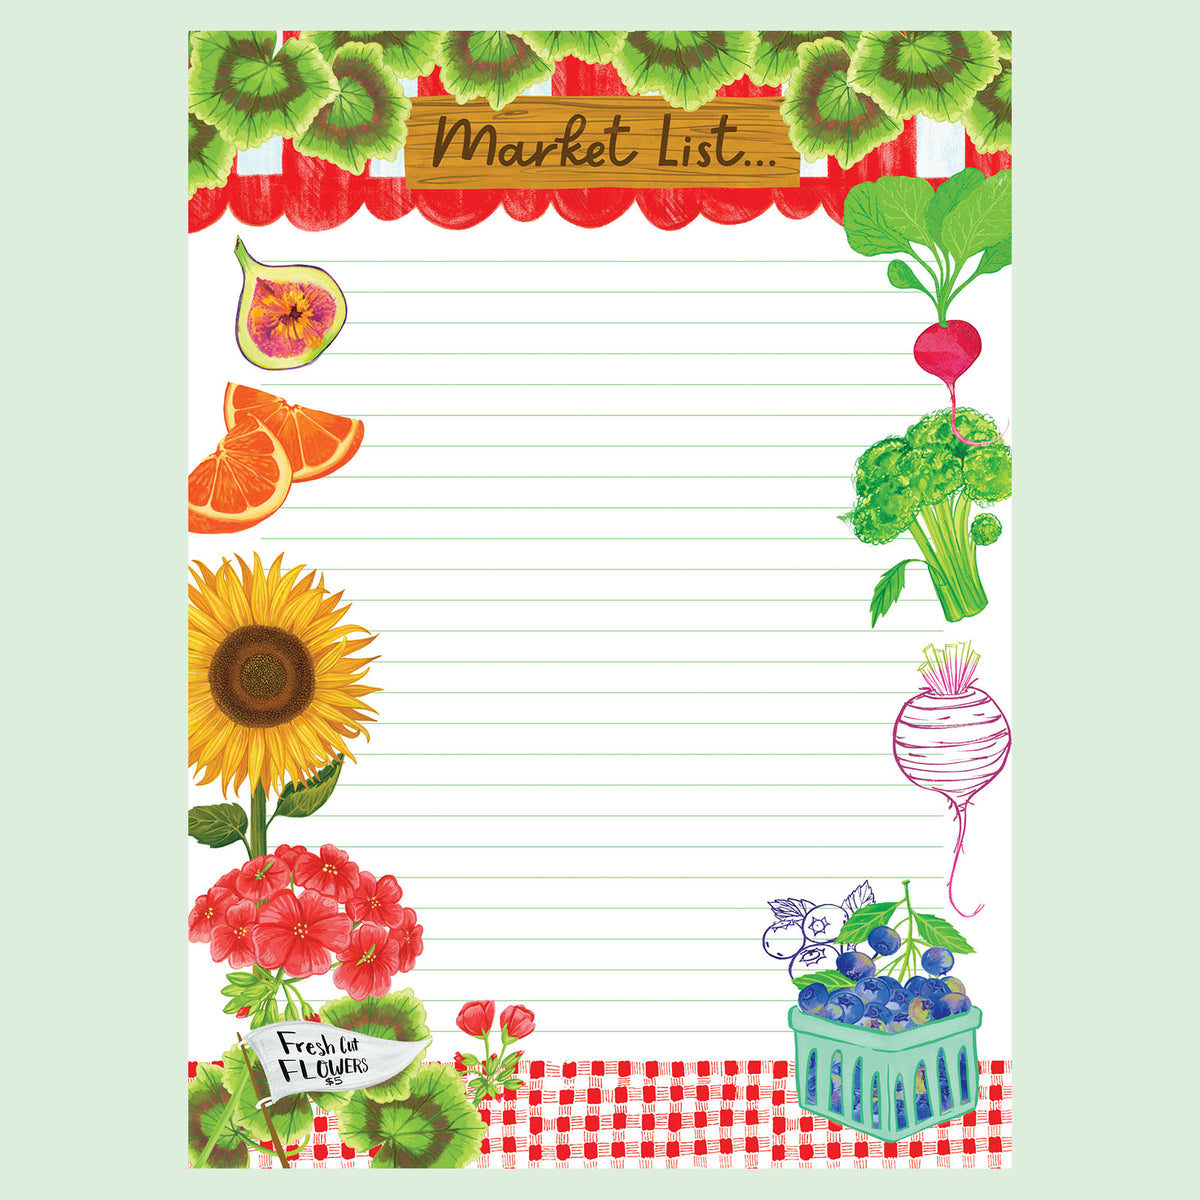 Market List Notepad containing illustration  of fruits, vegetables and flowers. Light Mint green background.